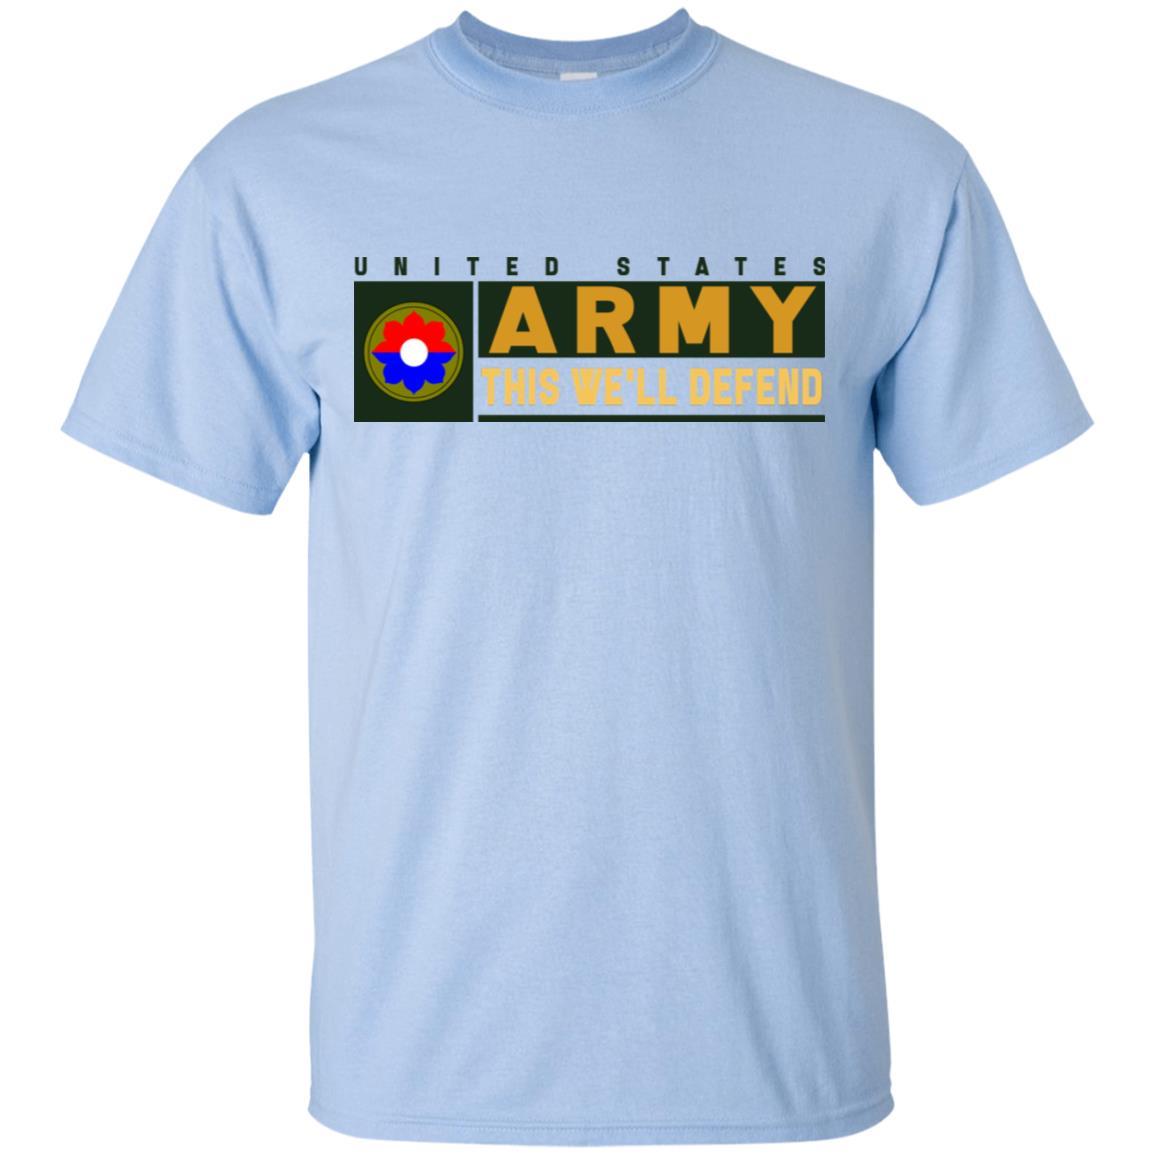 US Army 9th Infantry Division- This We'll Defend T-Shirt On Front For Men-TShirt-Army-Veterans Nation